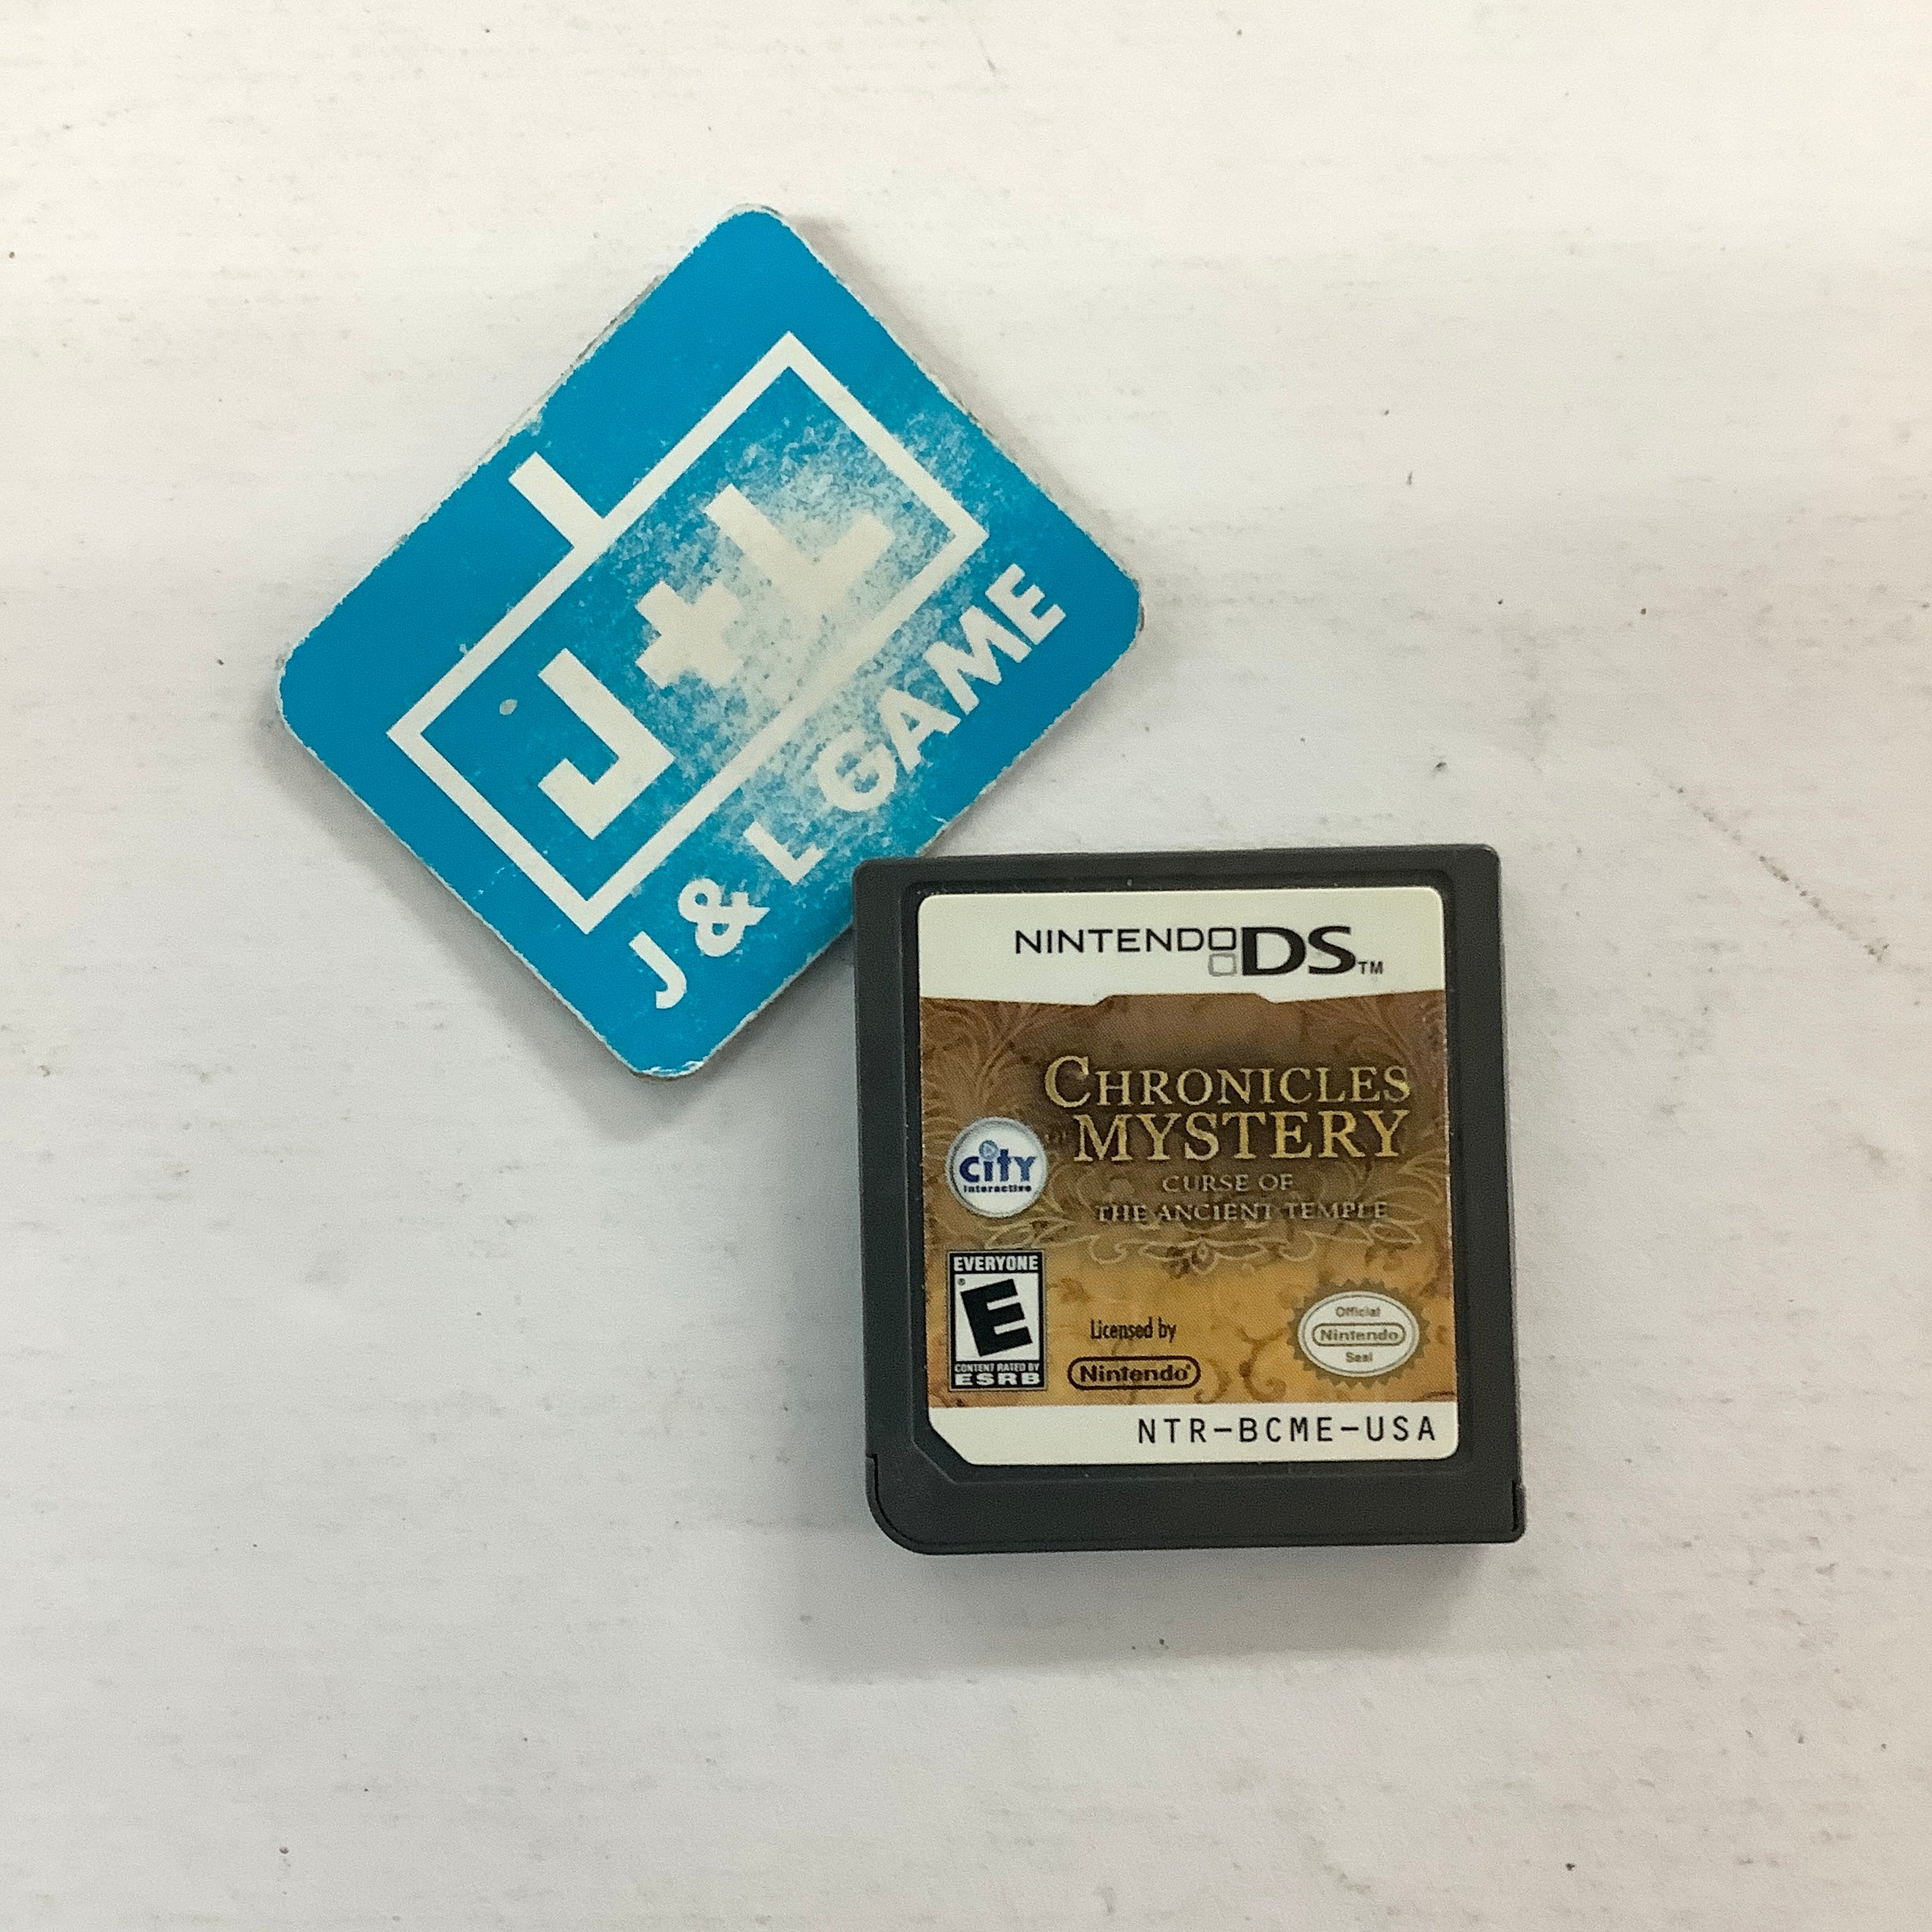 Chronicles of Mystery Curse of the Ancient Temple - (NDS) Nintendo DS [Pre-Owned] Video Games Nintendo   